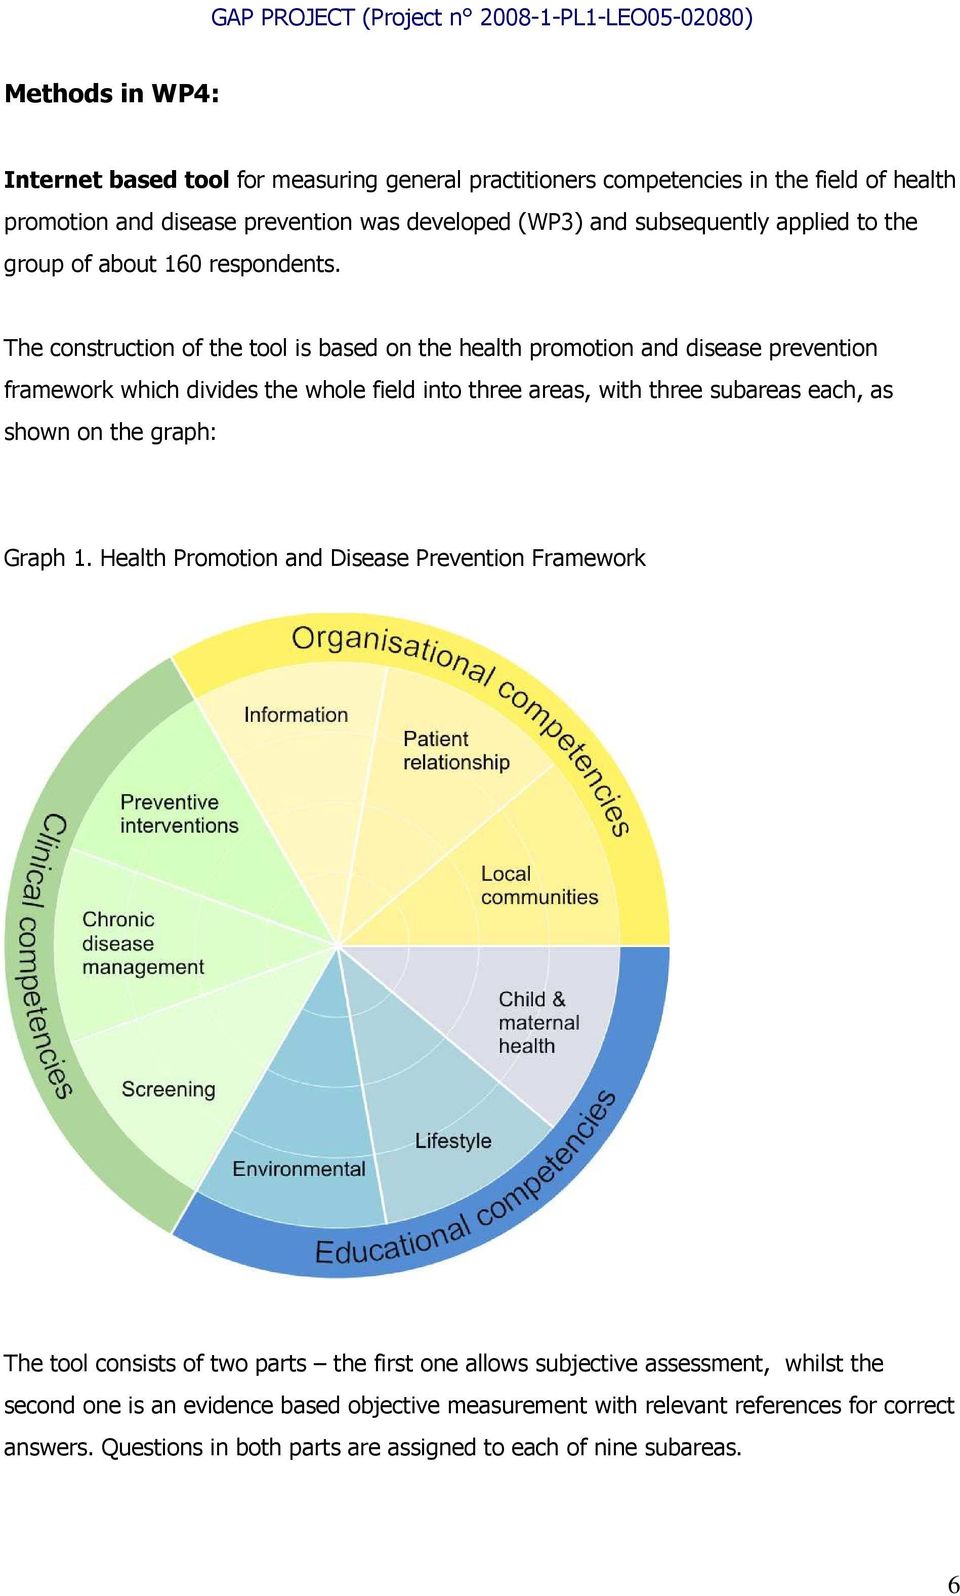 The construction of the tool is based on the health promotion and disease prevention framework which divides the whole field into three areas, with three subareas each, as shown on